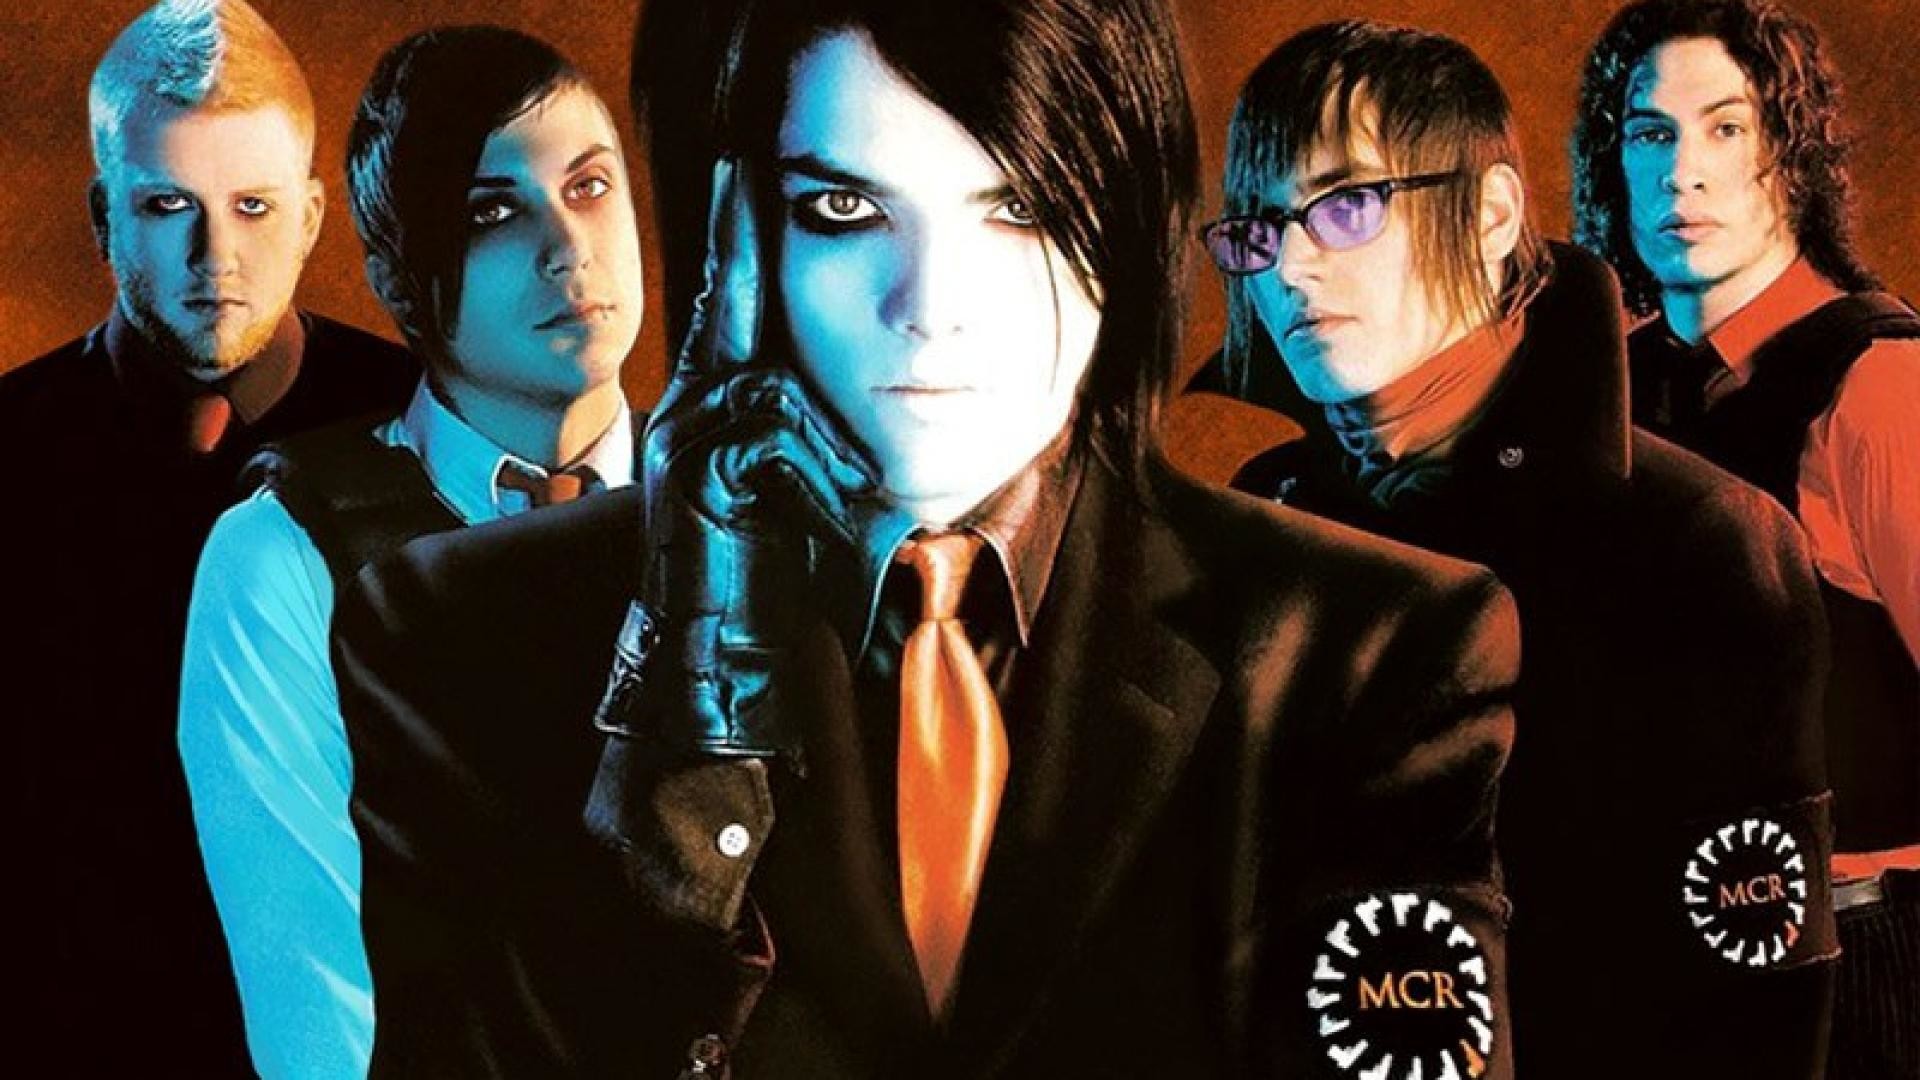 1920x1080 My Chemical Romance Wallpaper Wallpapers) – Adorable Wallpapers